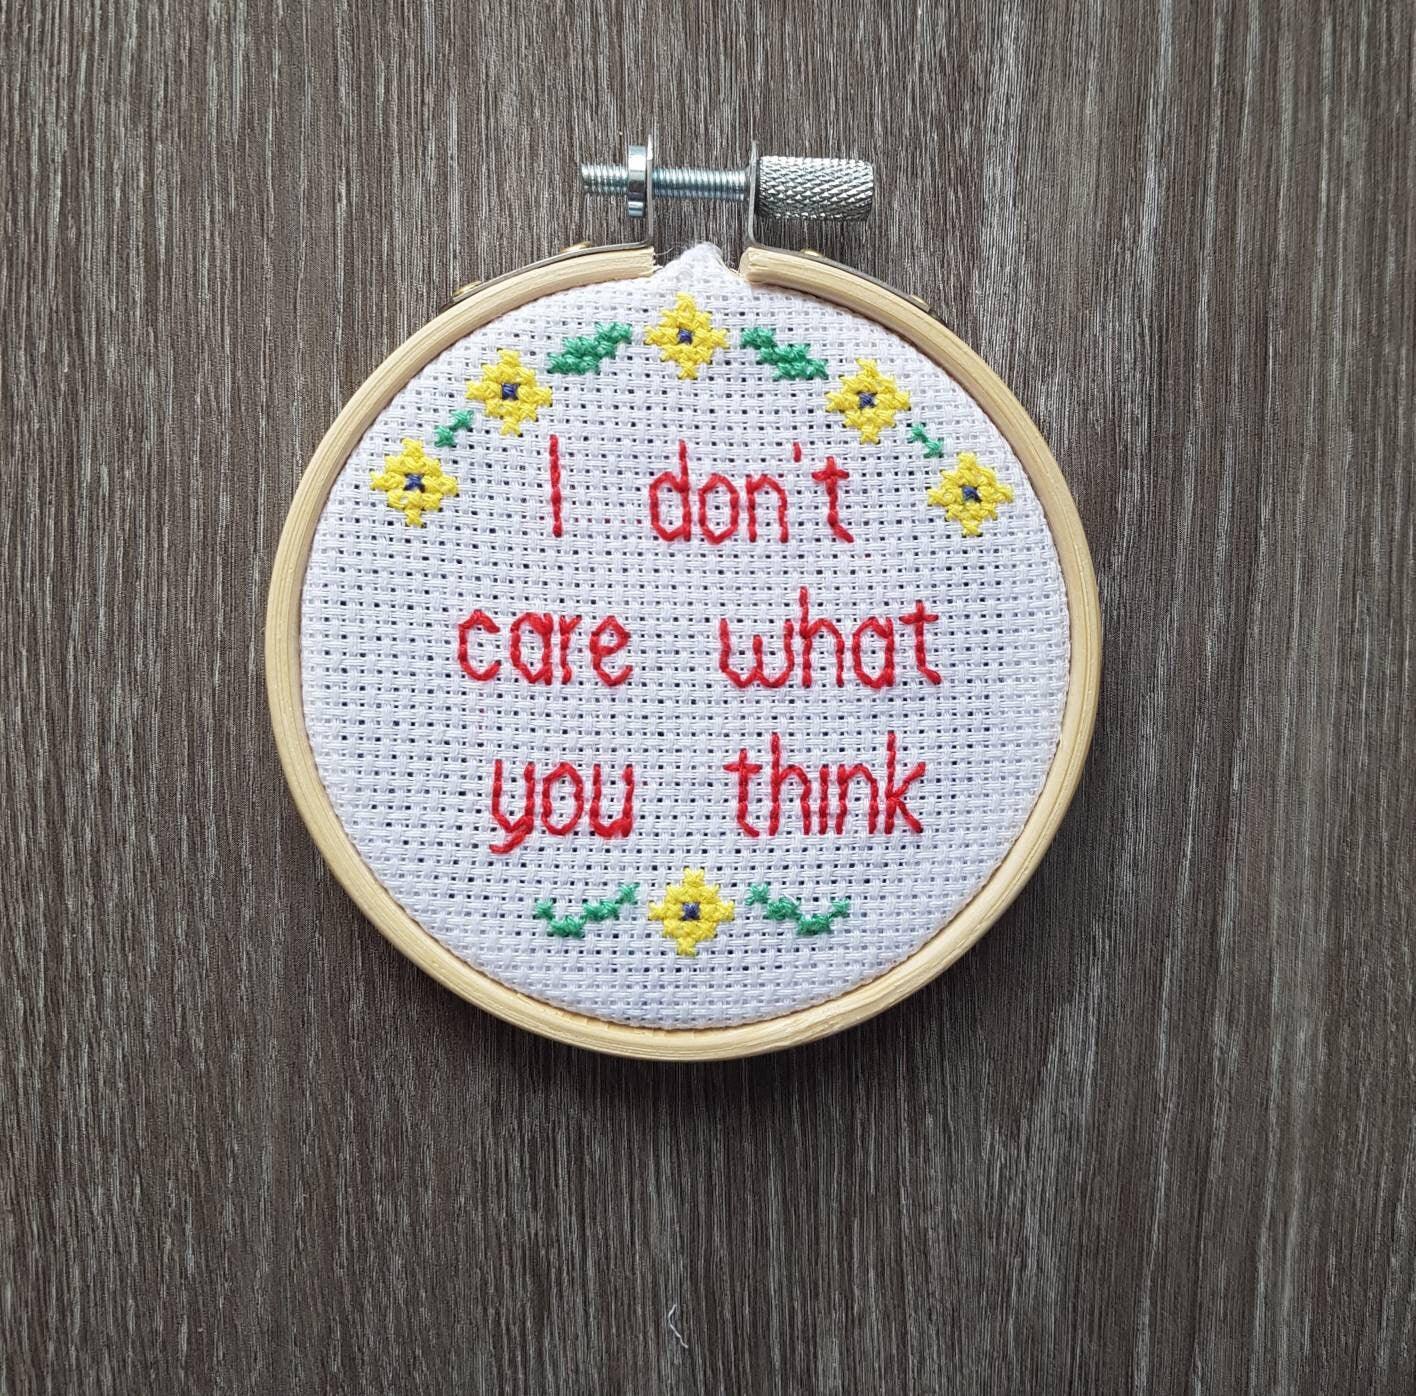 I don't care what you think, hand sewn embroidery quote - Thistleflat Crafts